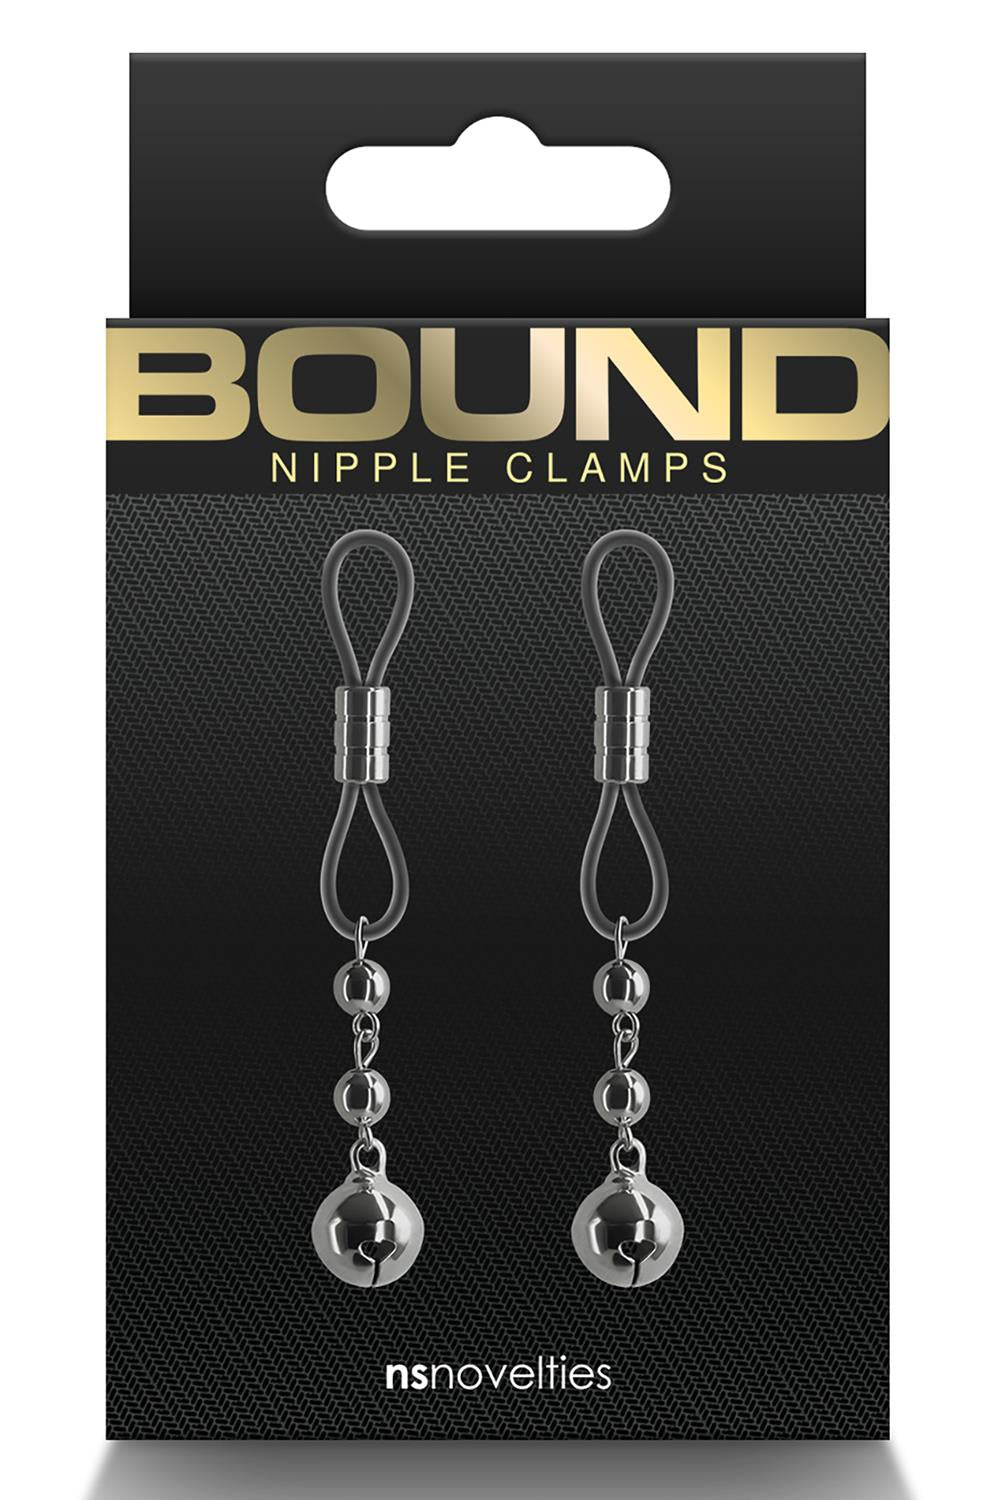 Bound - Nipple Clamps